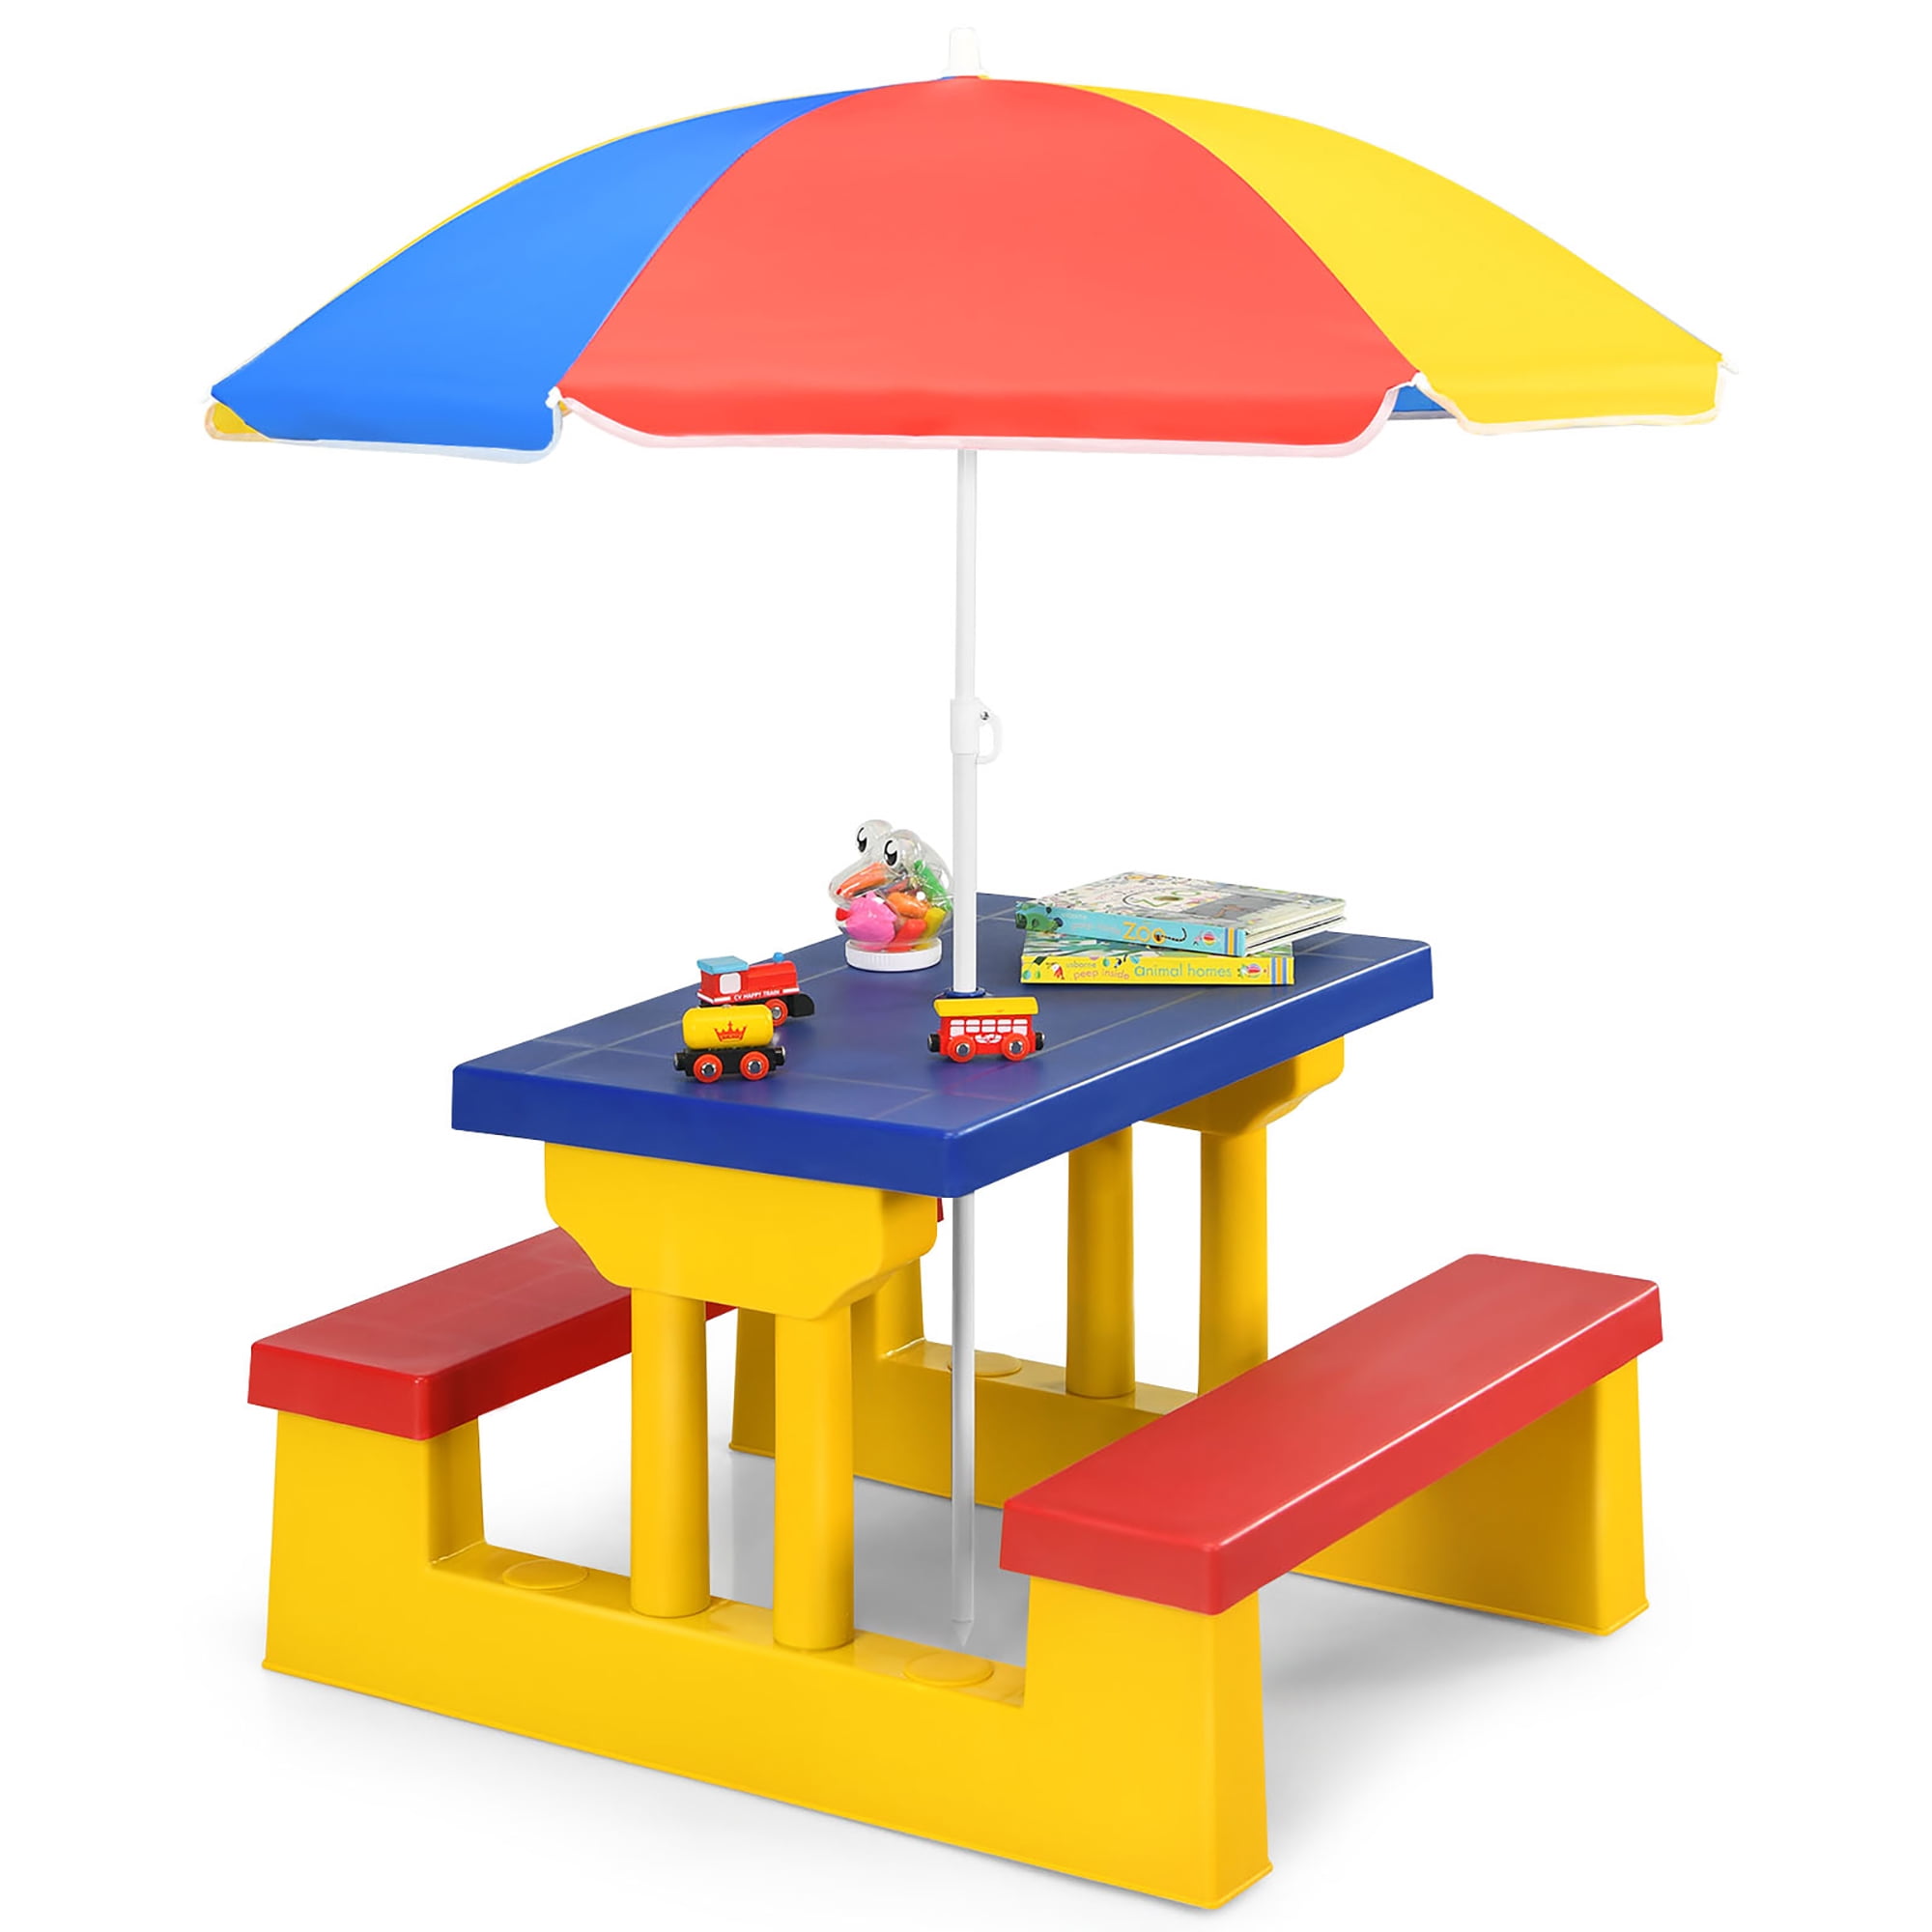 Costway 4 Seat Kids Picnic Table with Umbrella Garden Yard Folding Children Bench Outdoor Made with Durable Wood Seats Up to 4 Children 